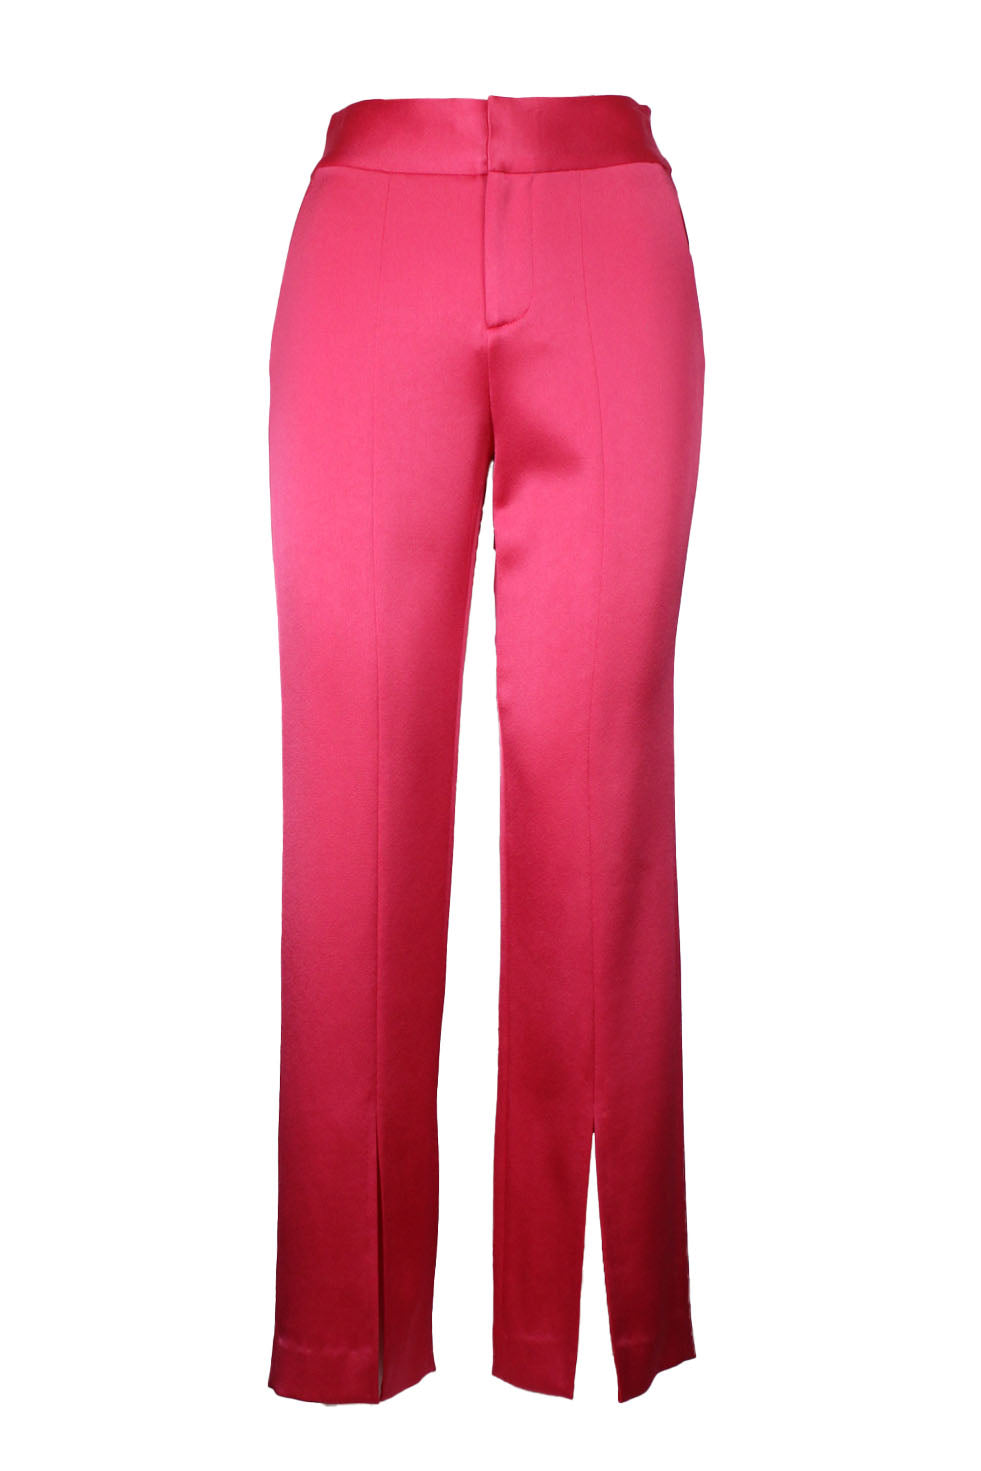 description: alice + olivia pink satin finish pants. features zip fly, hook closure at waist, open slit at front leg, elasticized waist at back, and slit pockets at back. 